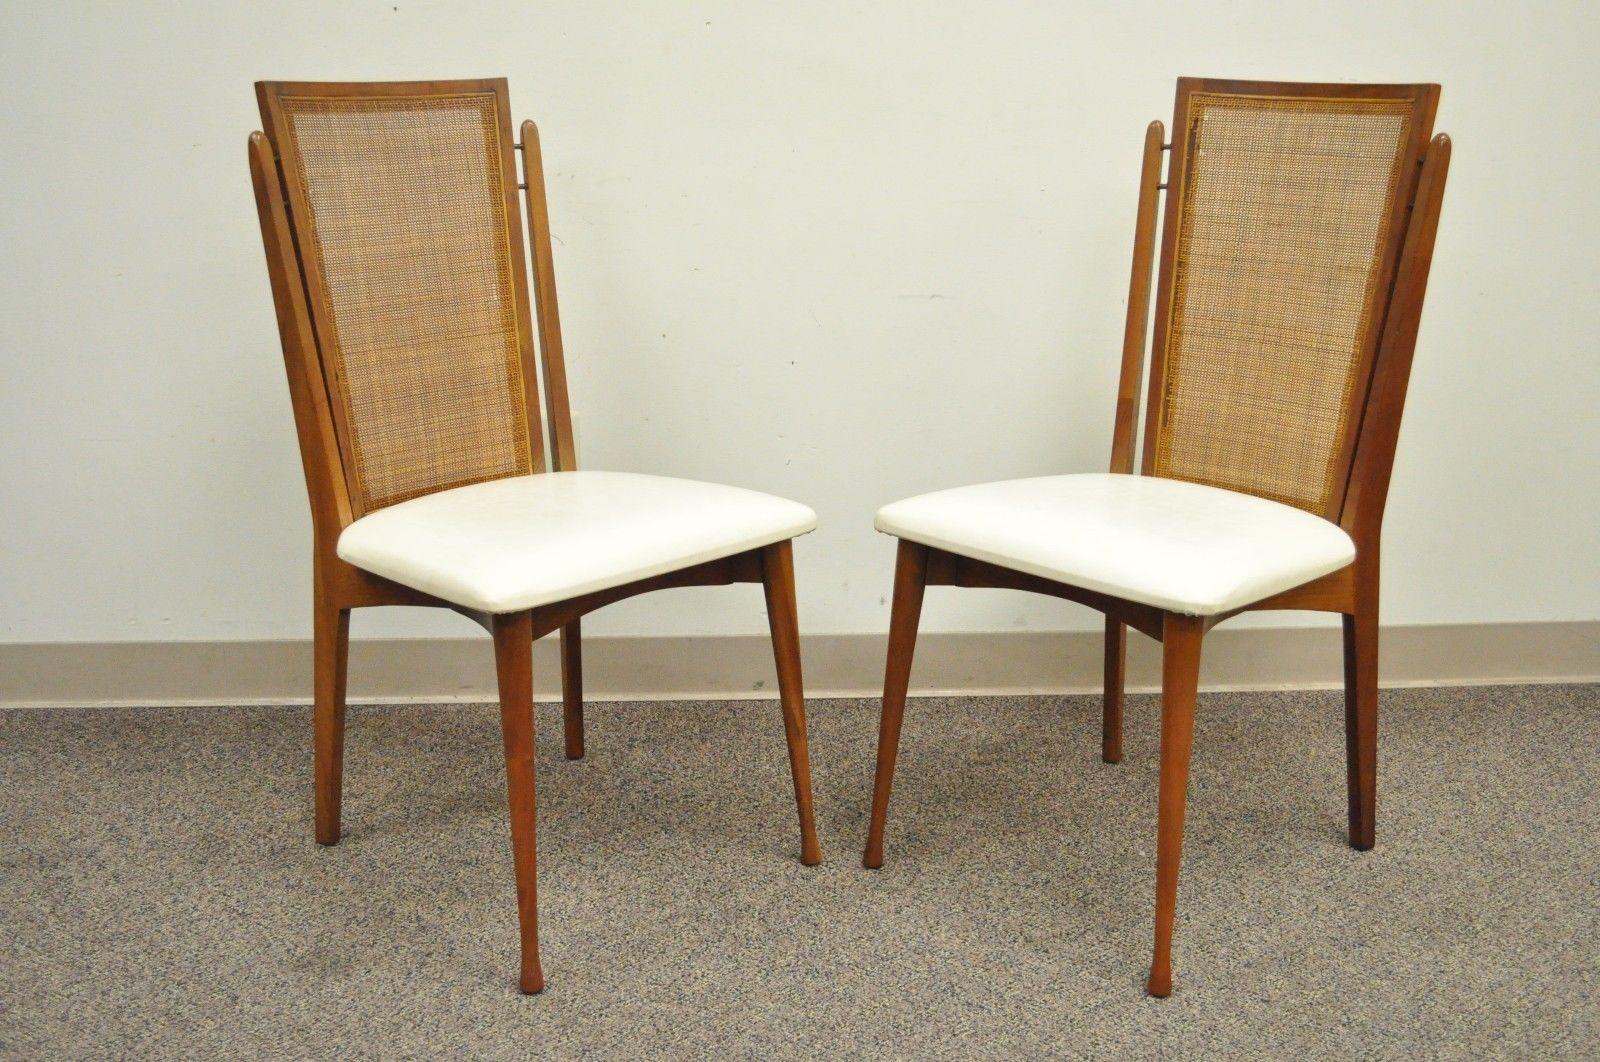 American Set of Six Specialty Woodcraft Midcentury Danish Modern Cane Teak Dining Chairs For Sale